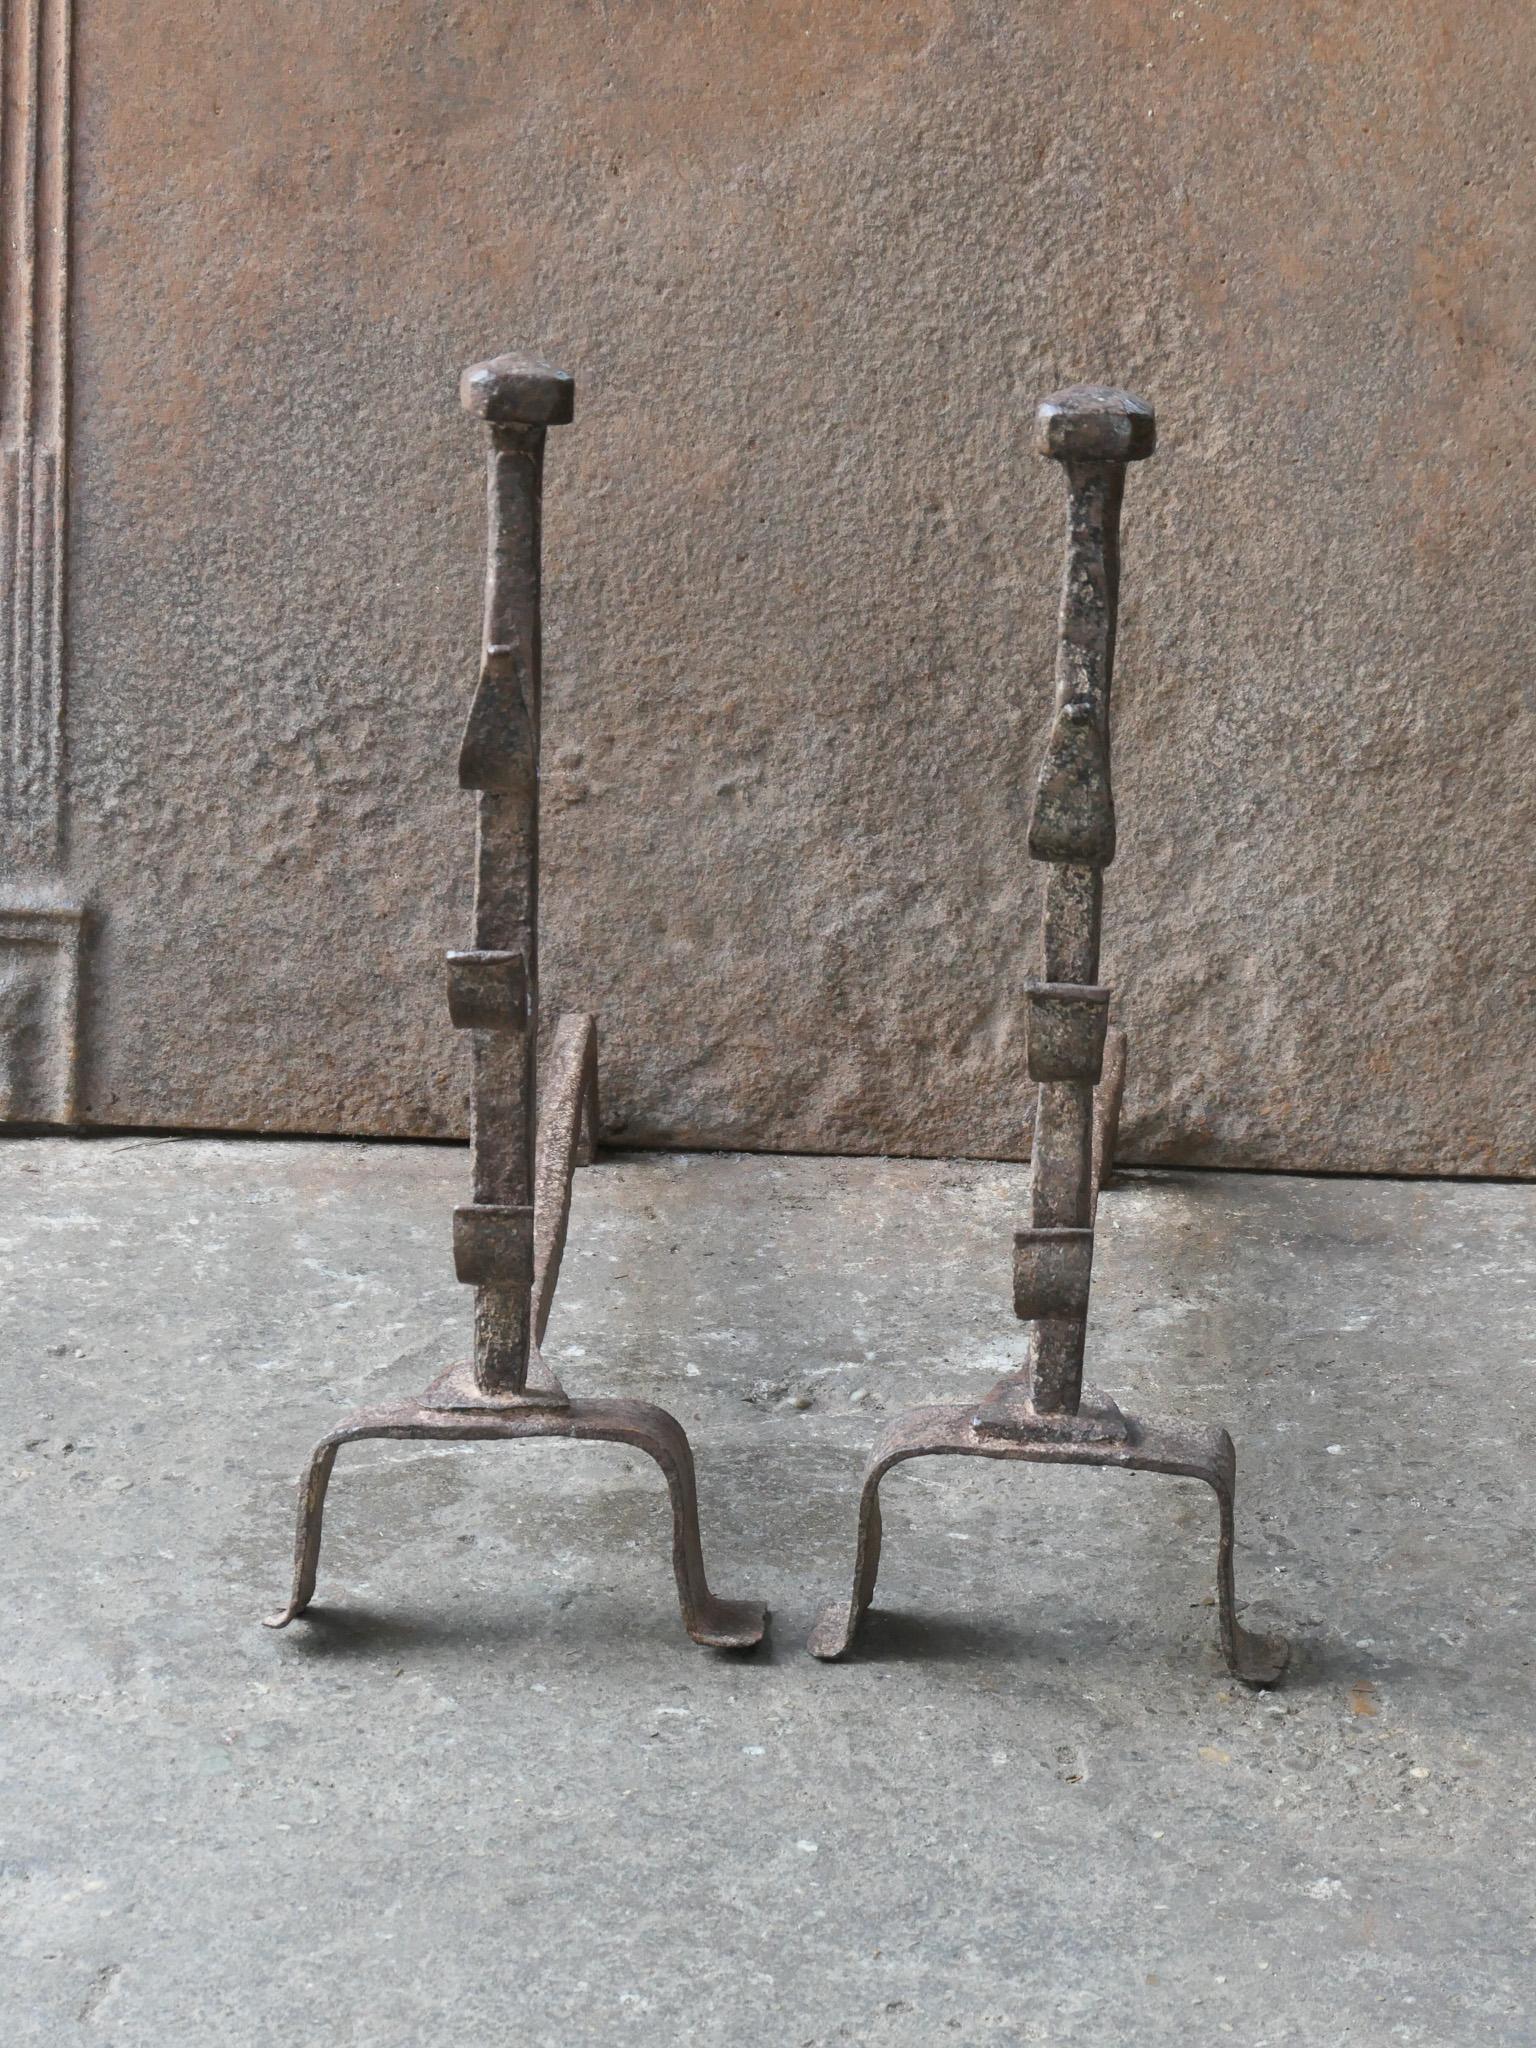 Late 18th or early 19th century French neoclassical period andirons. The andirons are hand forged and made of wrought iron. The andirons have spit hooks to grill meat and poultry. The condition of the andirons is good.







 